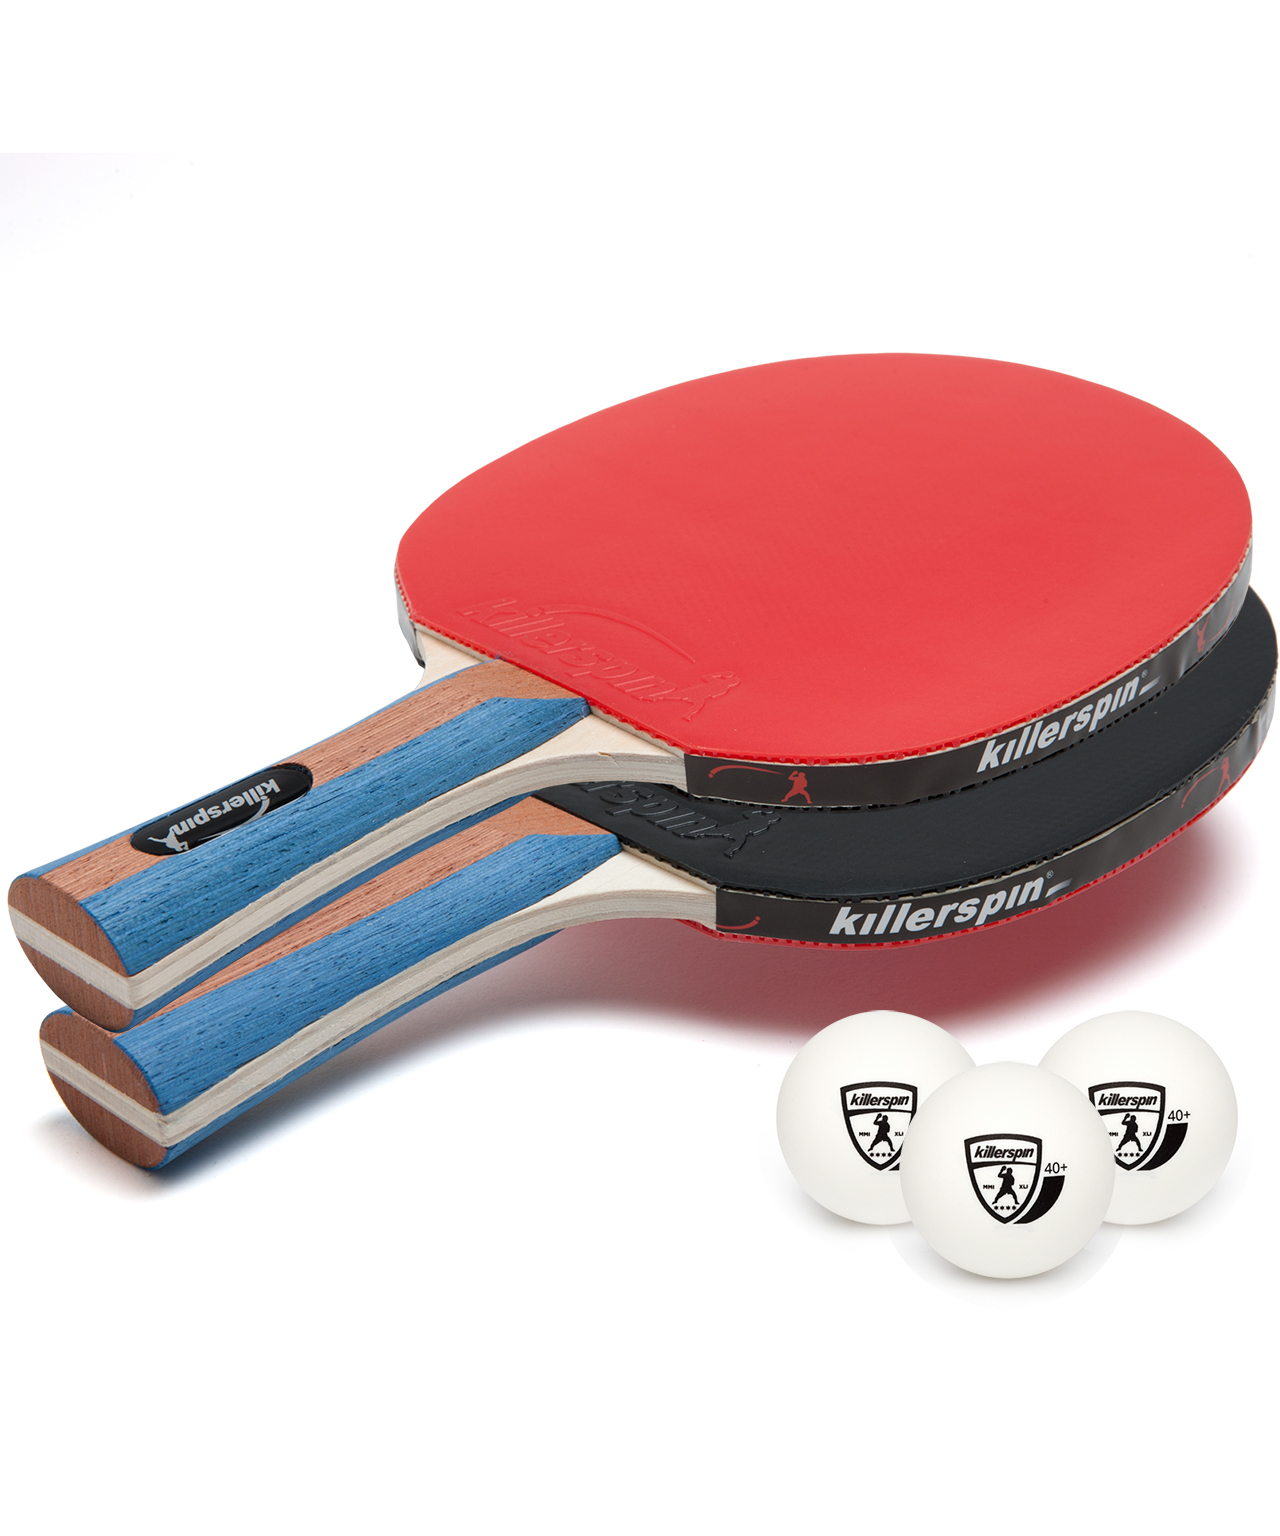 Killerspin JET SET 2 Table Tennis Set with 2 Paddles and 3 Balls - image 1 of 5